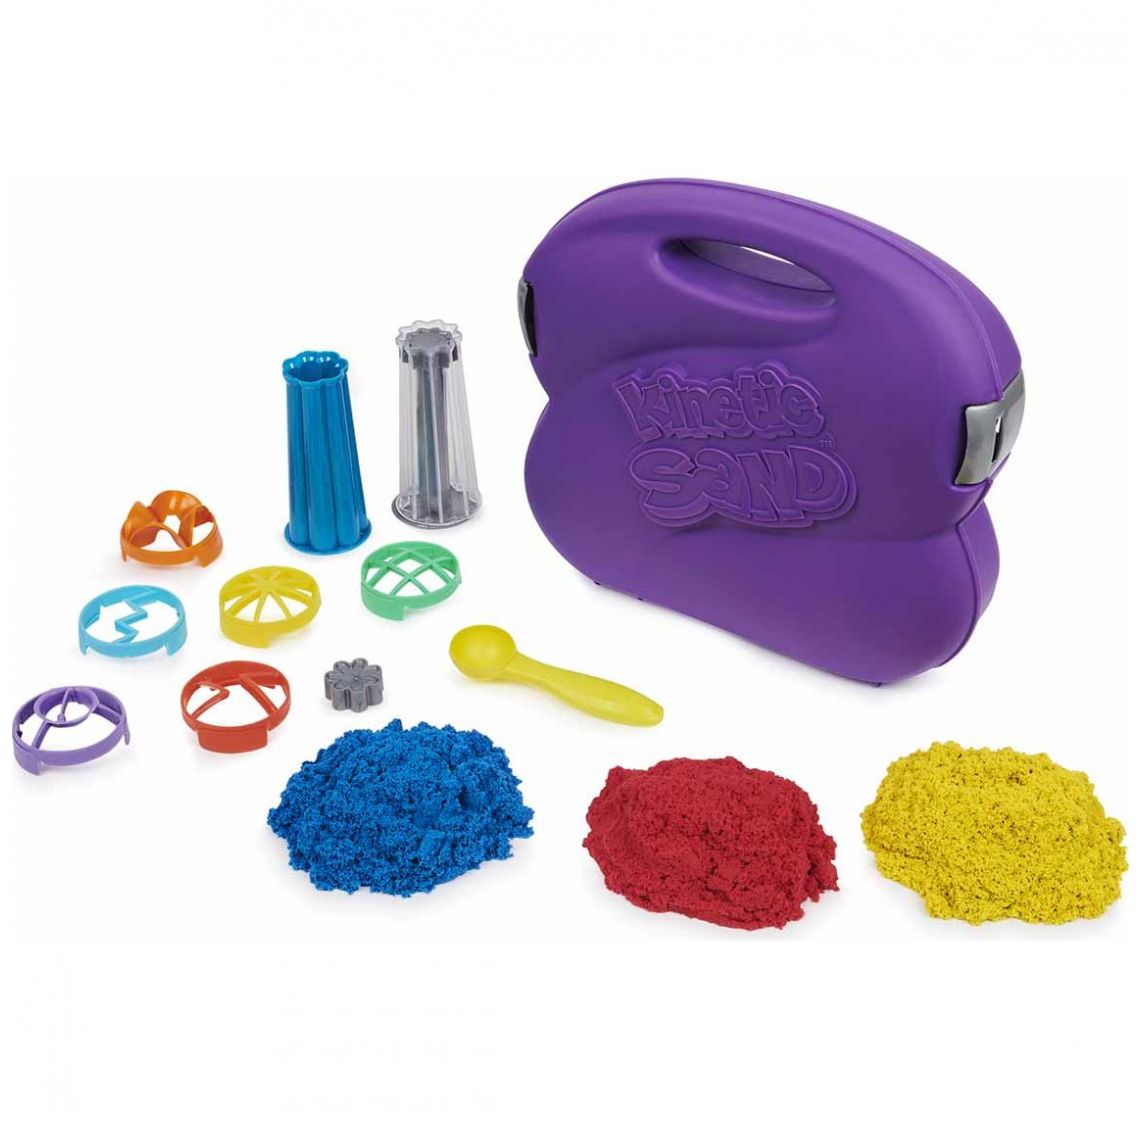 Kinetic Sand Flow'mo Playset Spin Master